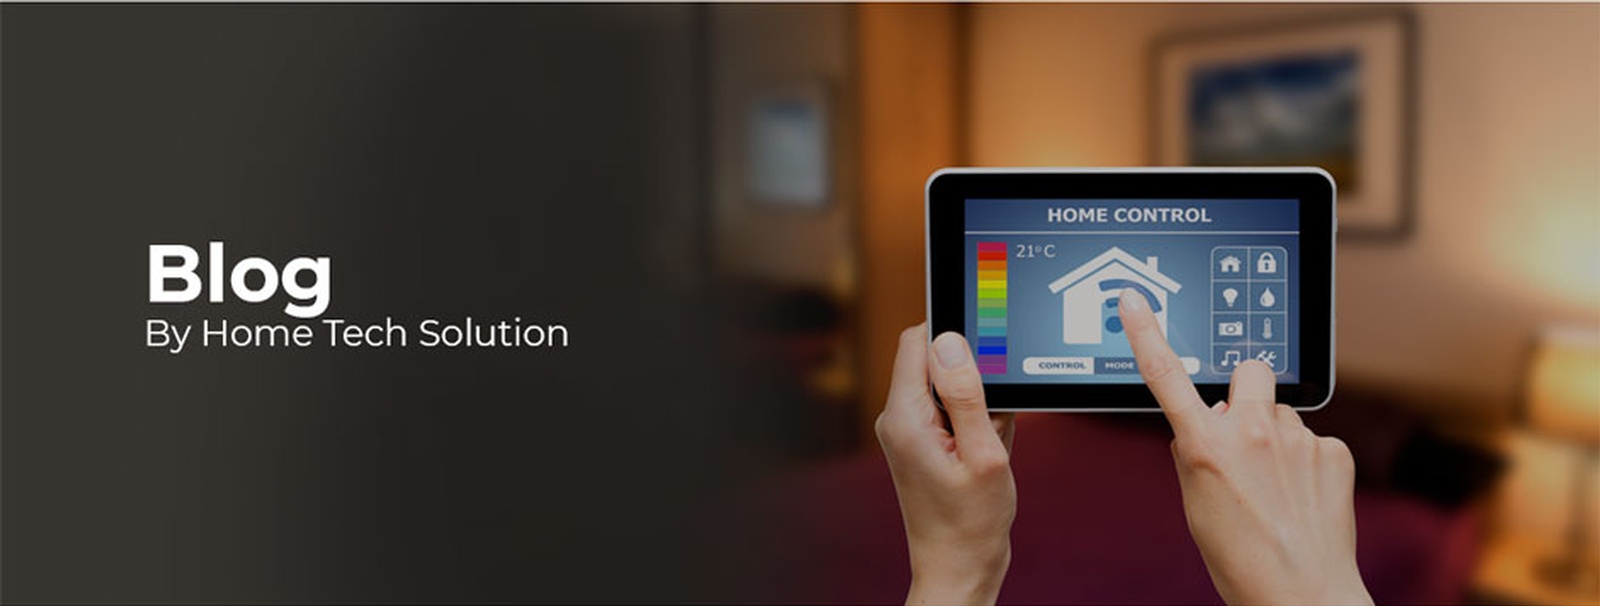 Blog by Home Tech Solution